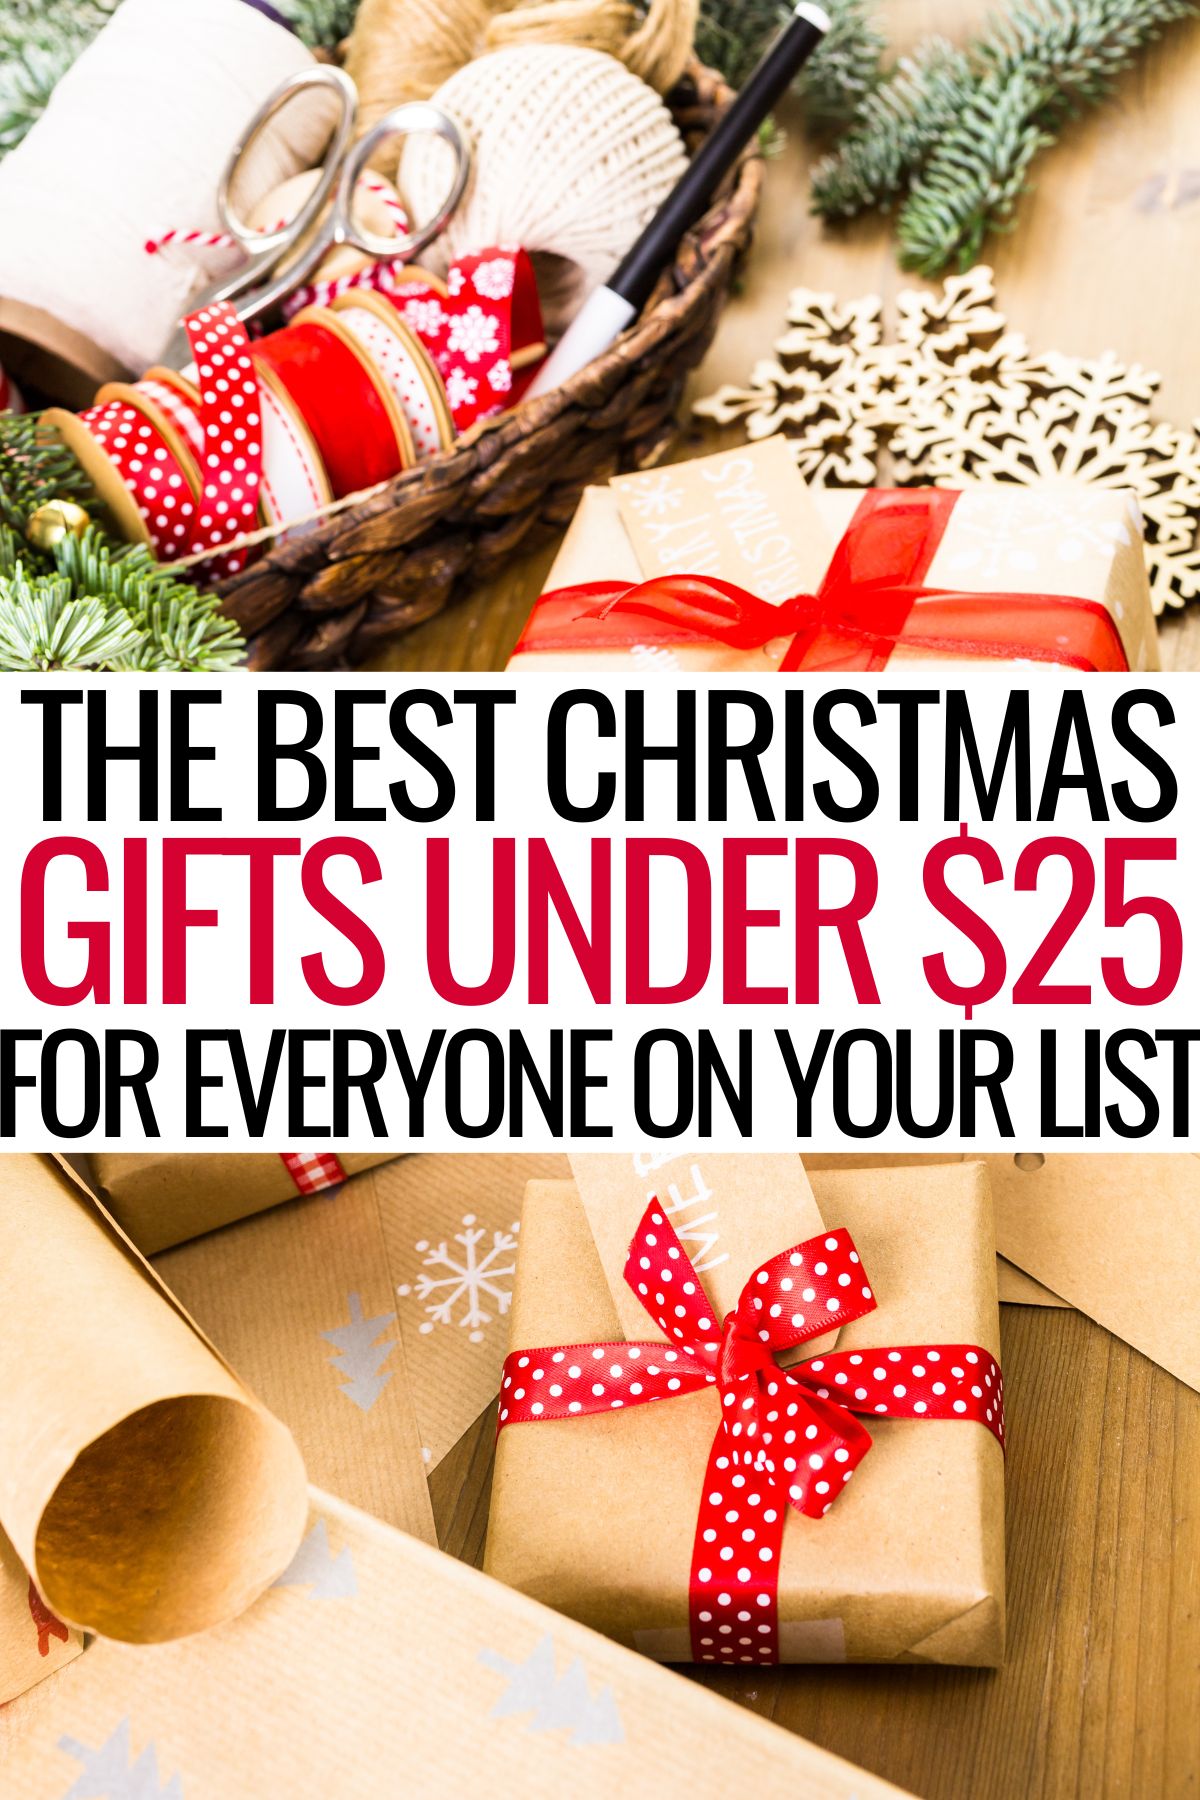 Christmas gifts on table with text the best christmas gifts under $25 for everyone on your list